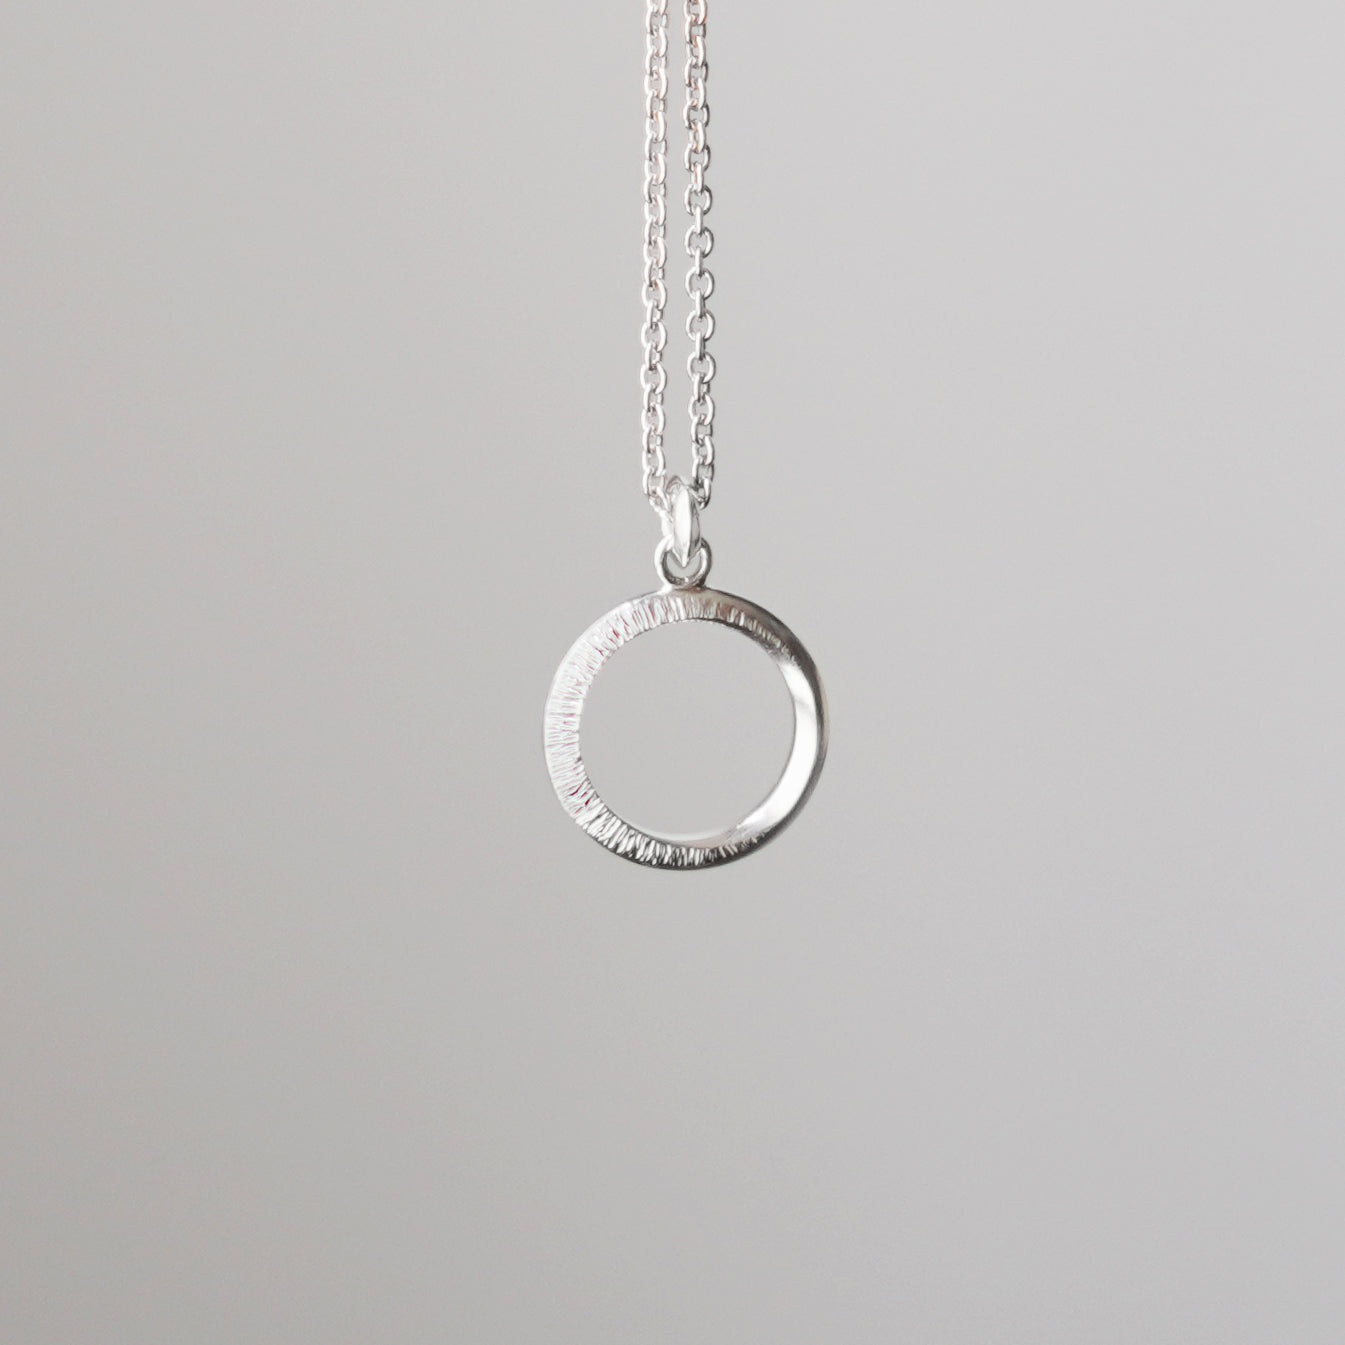 Crescent Moon Hammered Circle Necklace - Silver - Aisling Chou Studio